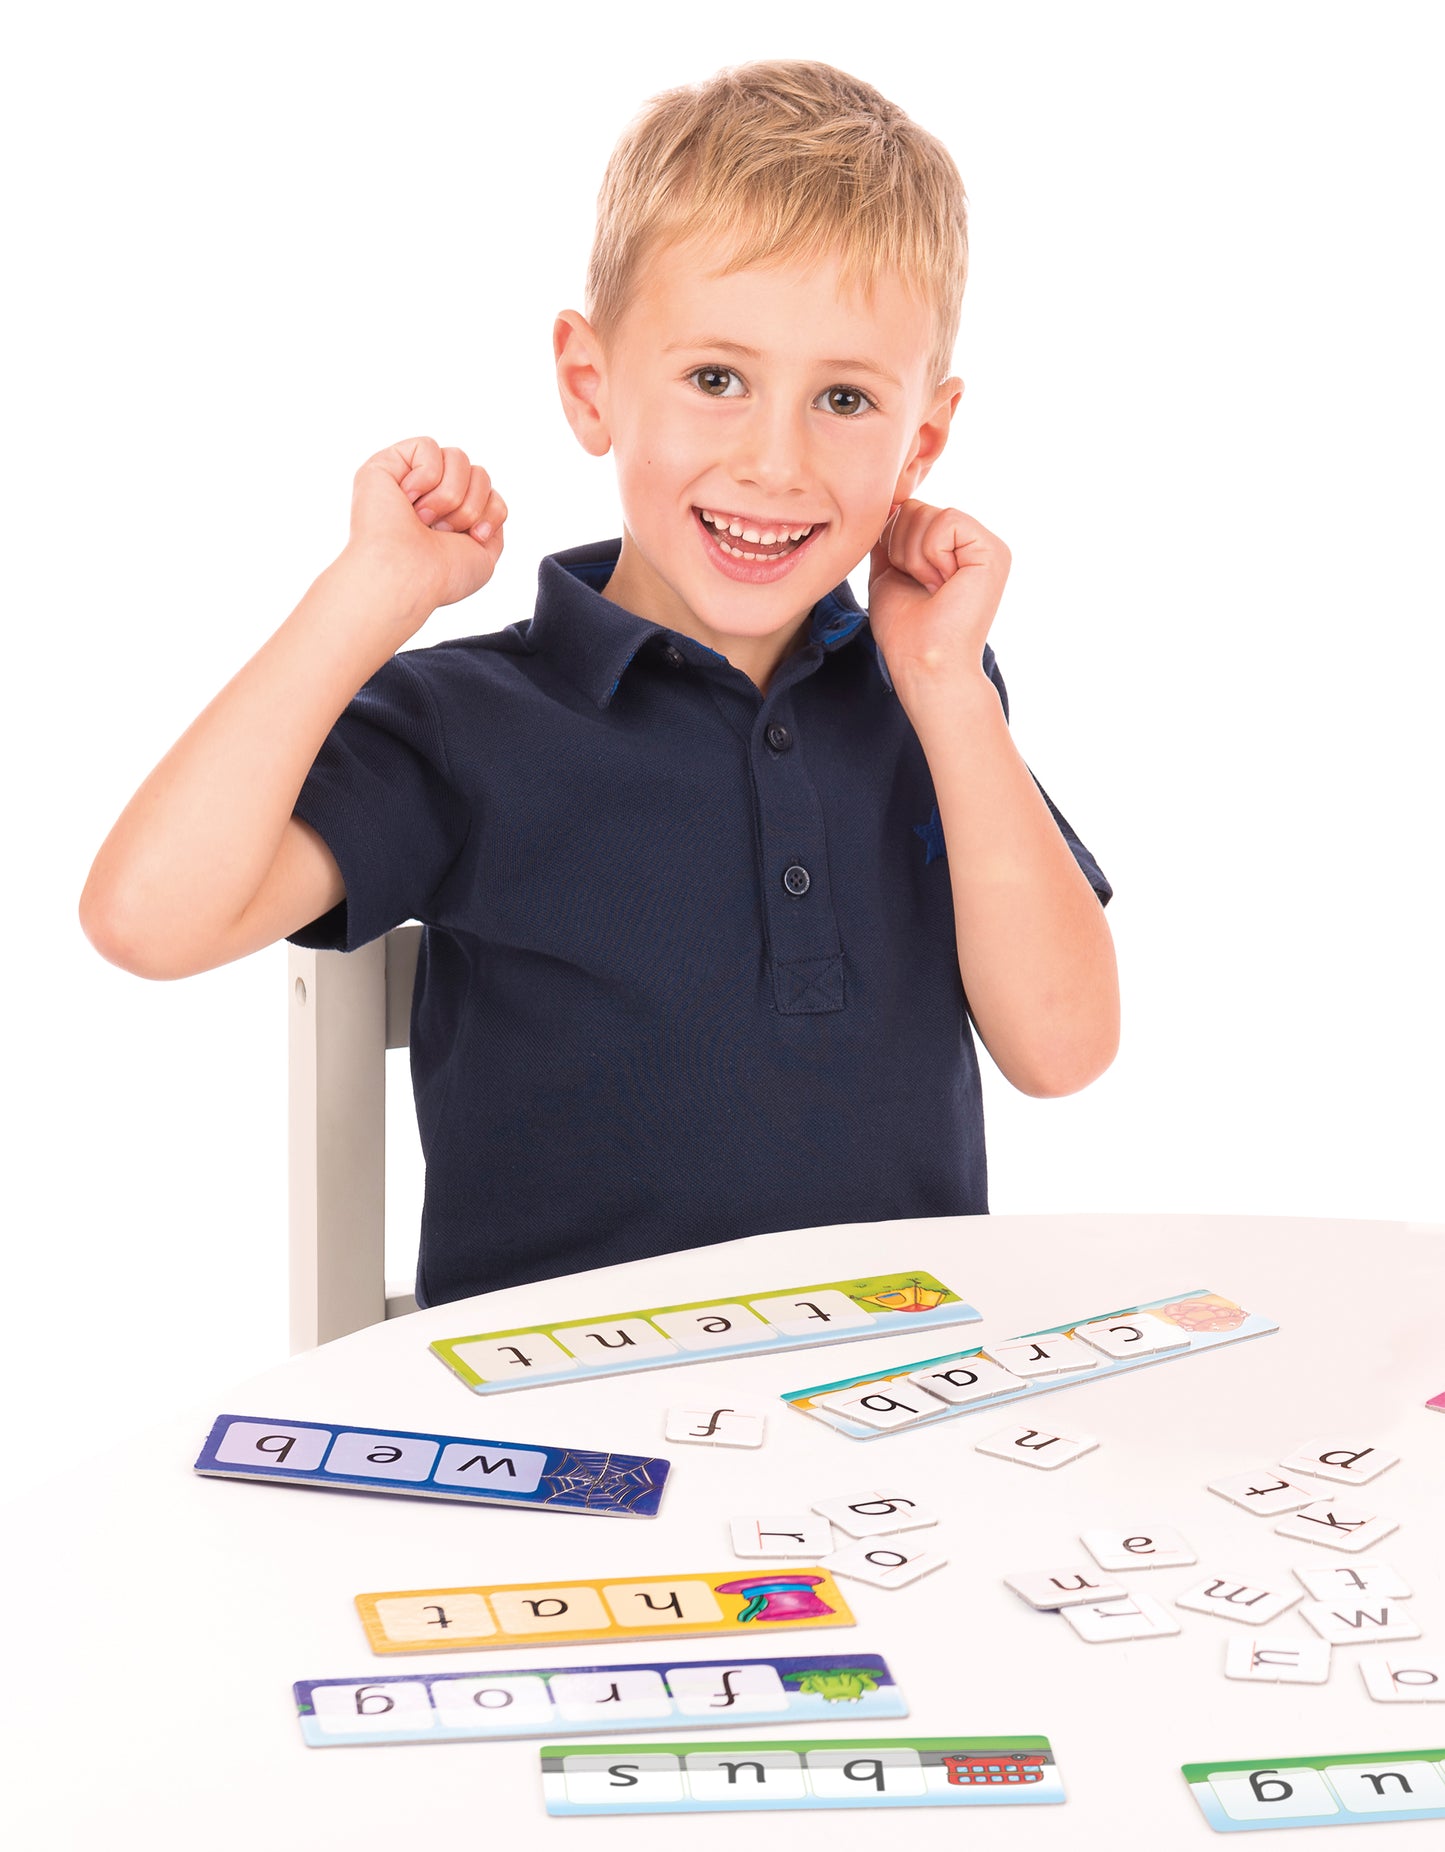 Orchard Toys Match and Spell Word Building Game